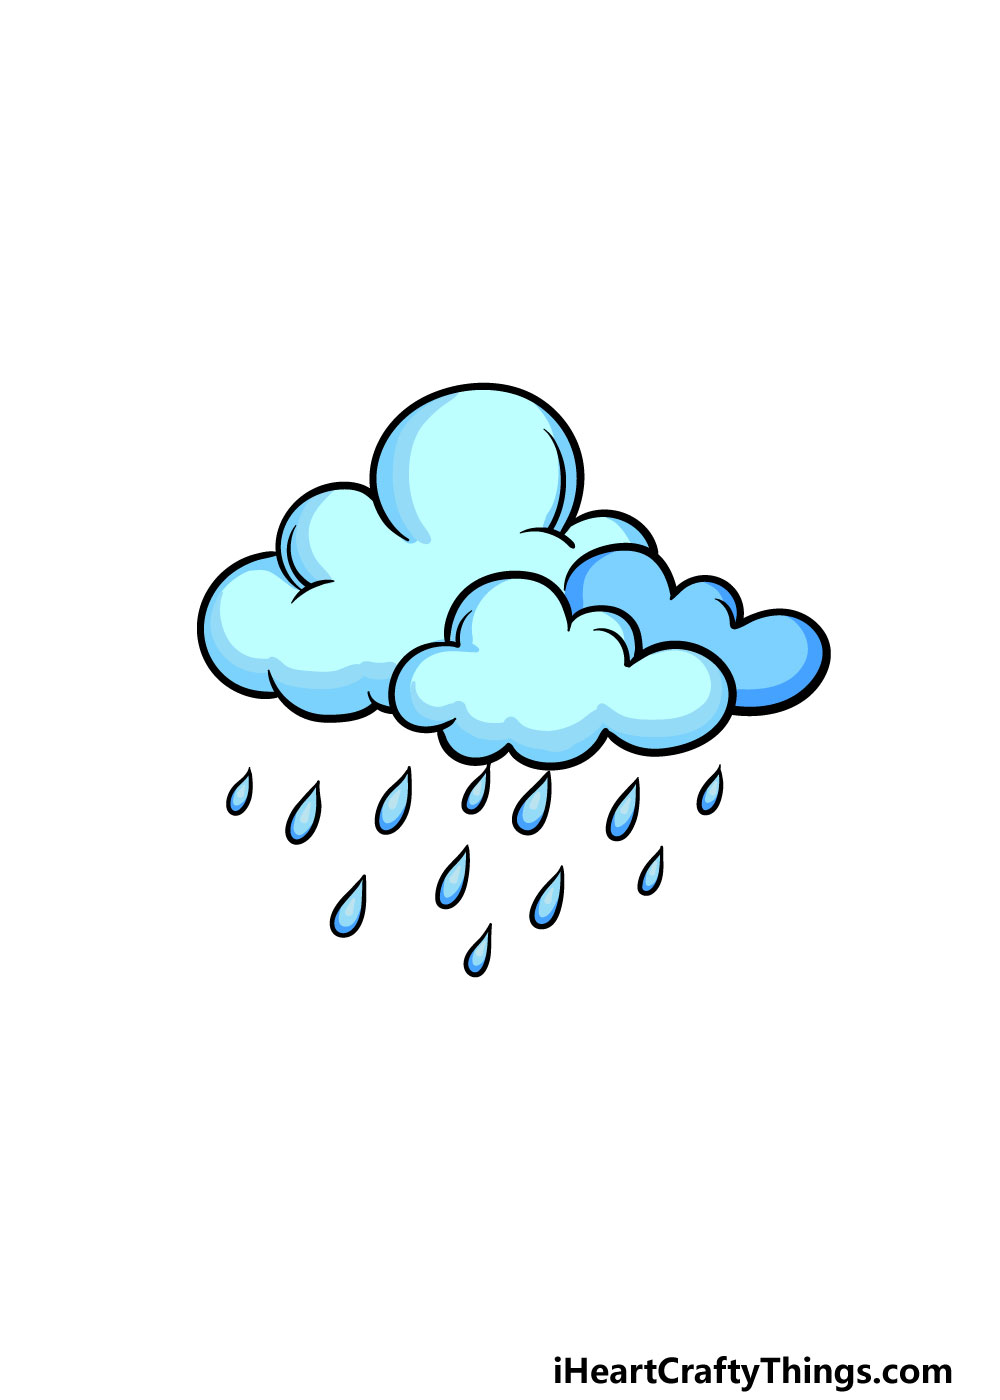 Clouds Under Heavy Rain PNG Transparent Image And Clipart Image For Free  Download - Lovepik | 401528787